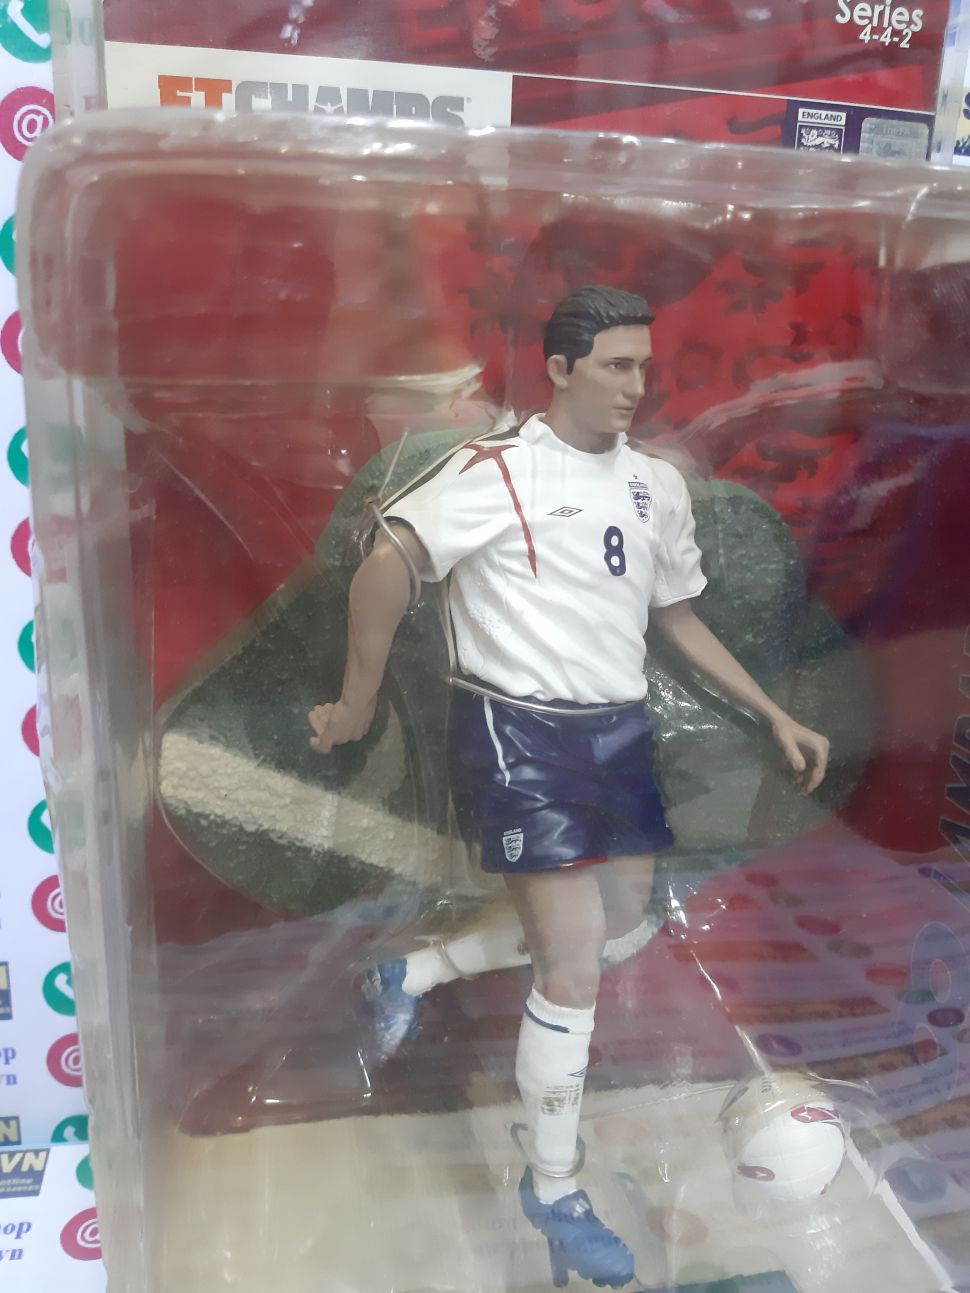 Tượng Lampard England 2005 2006 2007 home white FT Champs series 4-4-2